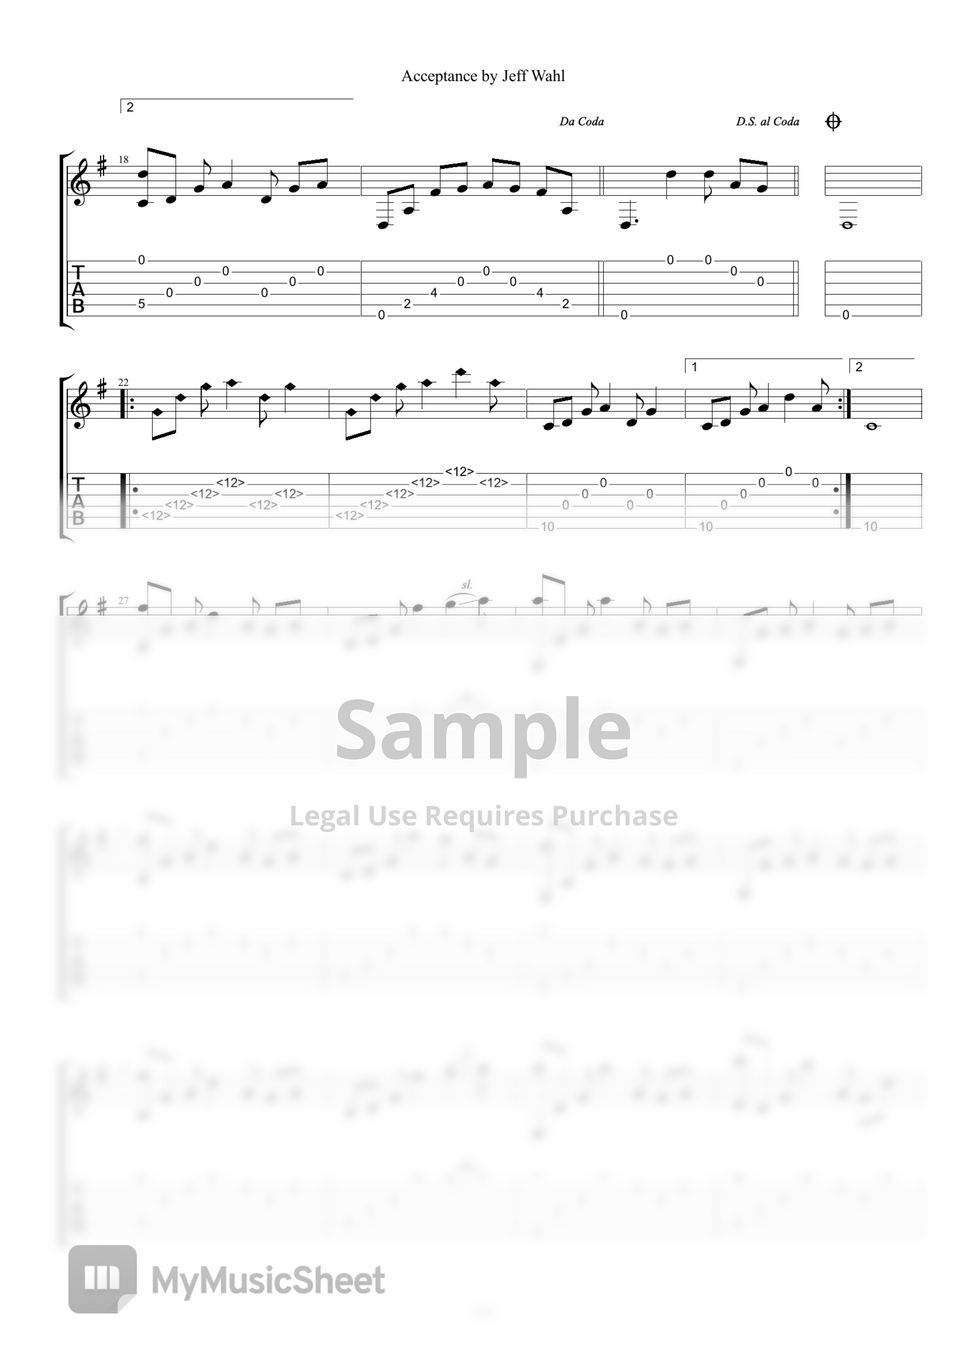 Jeff Wahl - Acceptance (TAB Sheet Music) by guitar kuitar